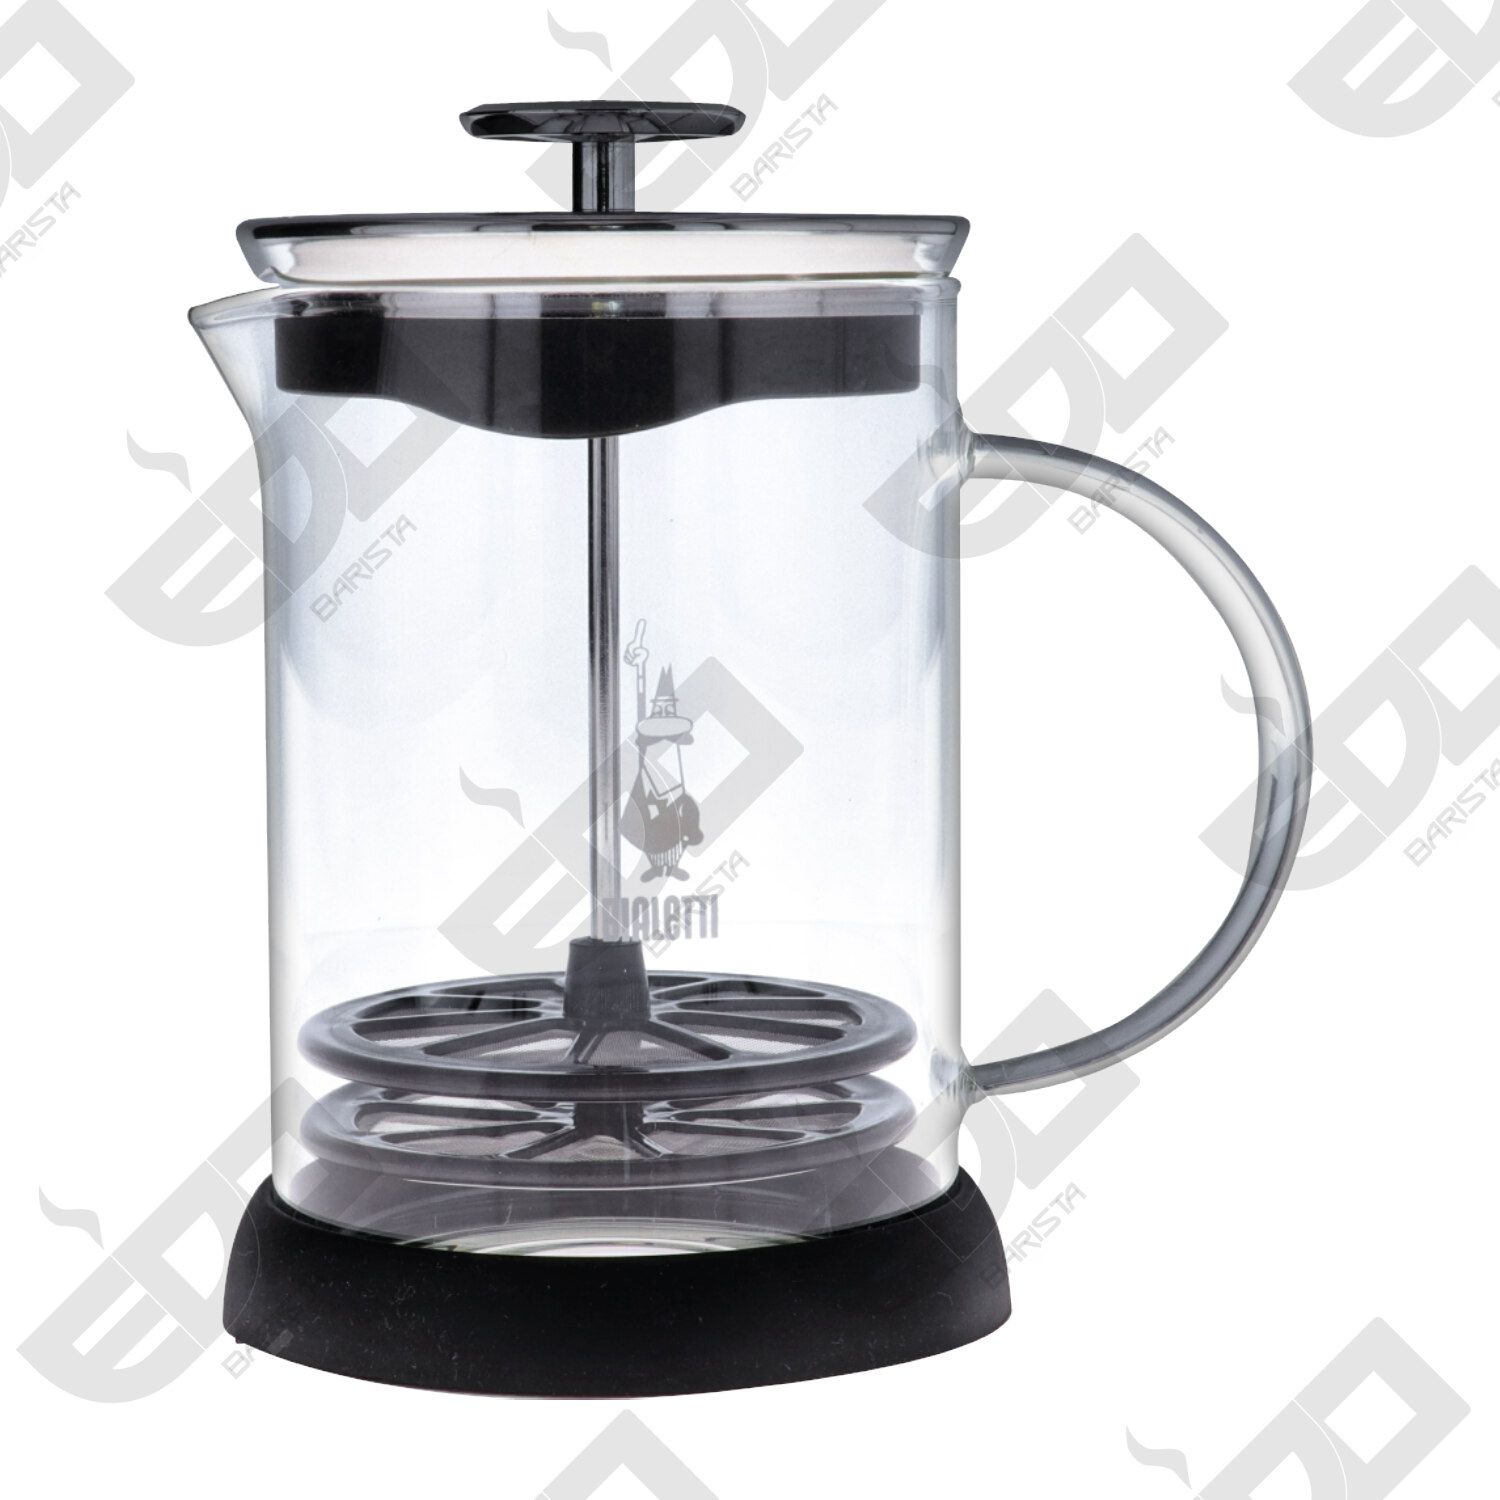 Bialetti manual milk frother: for a perfect milk cream